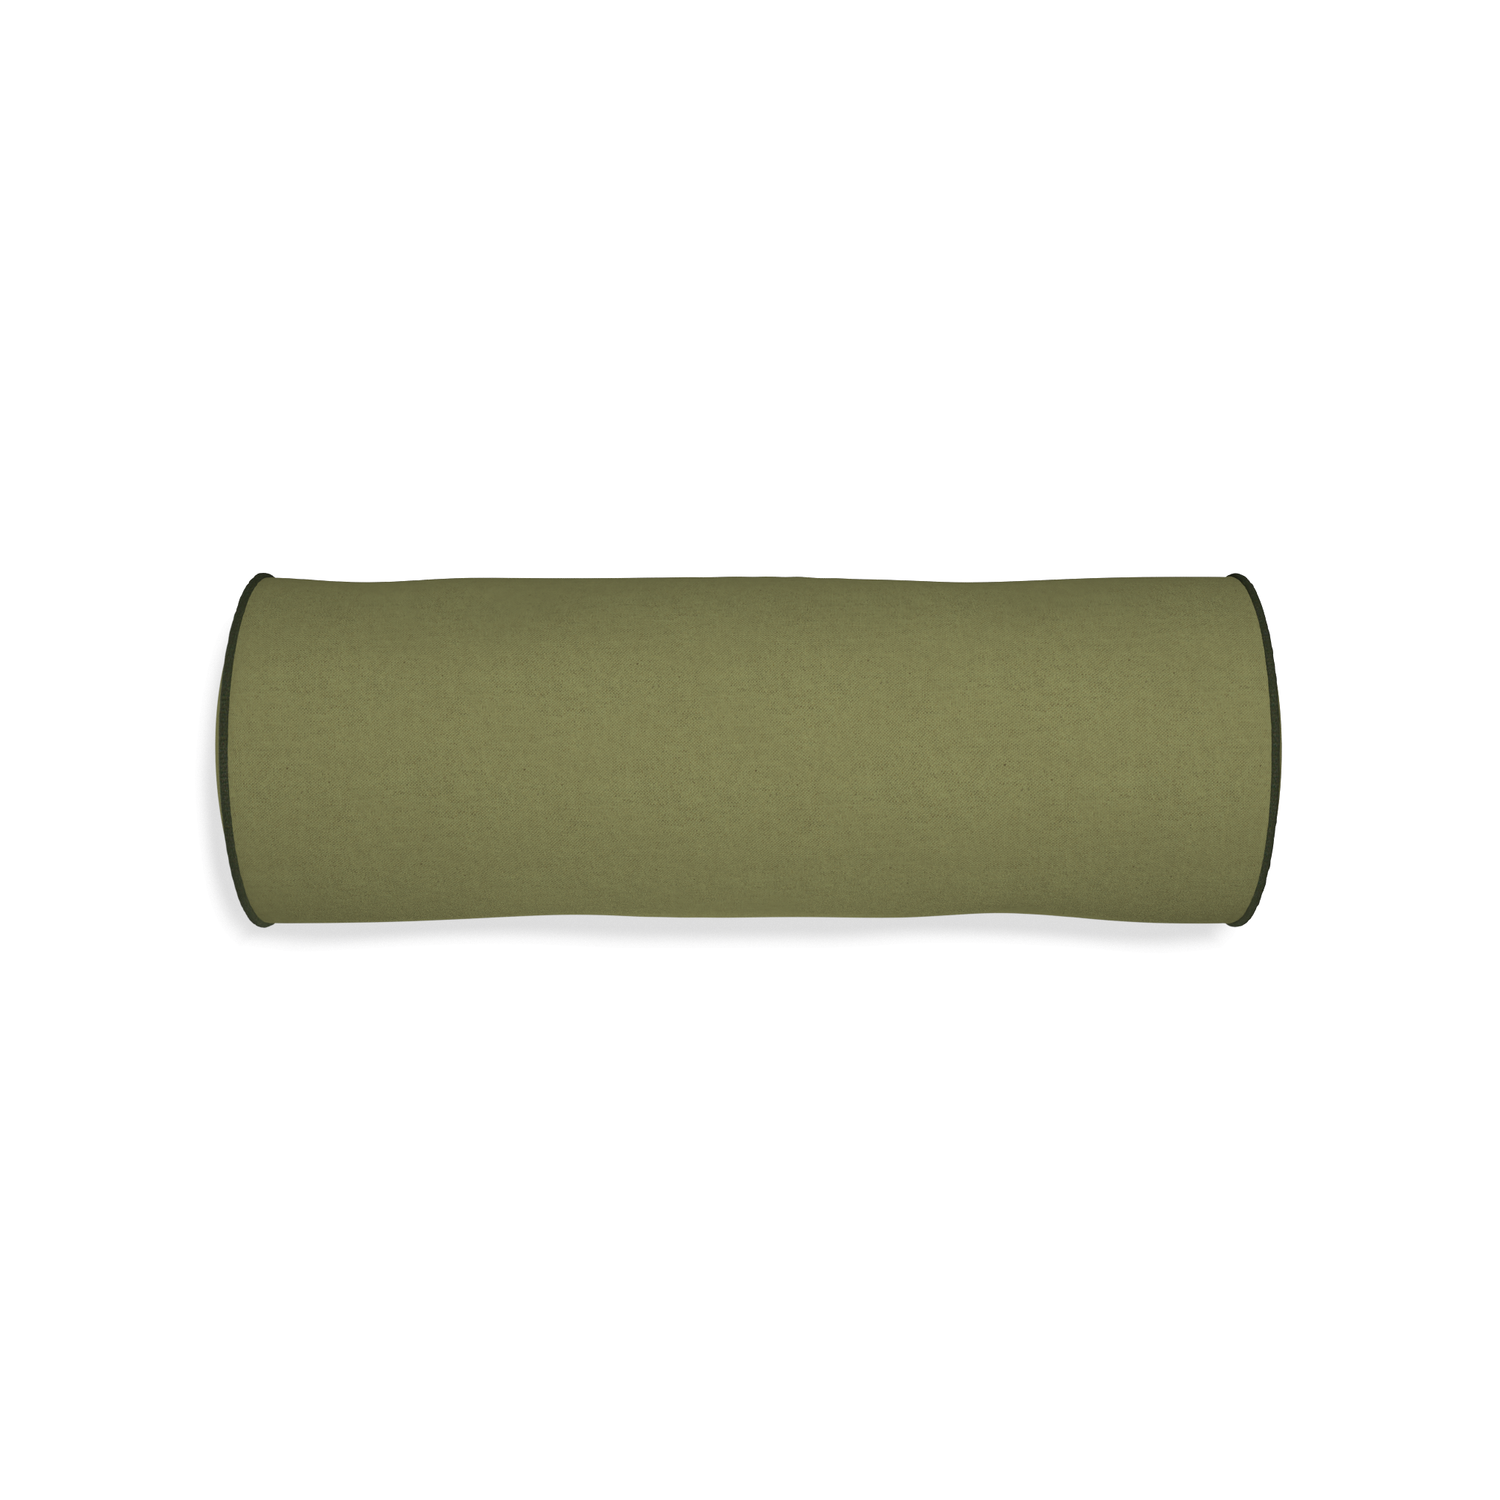 Bolster moss custom moss greenpillow with f piping on white background